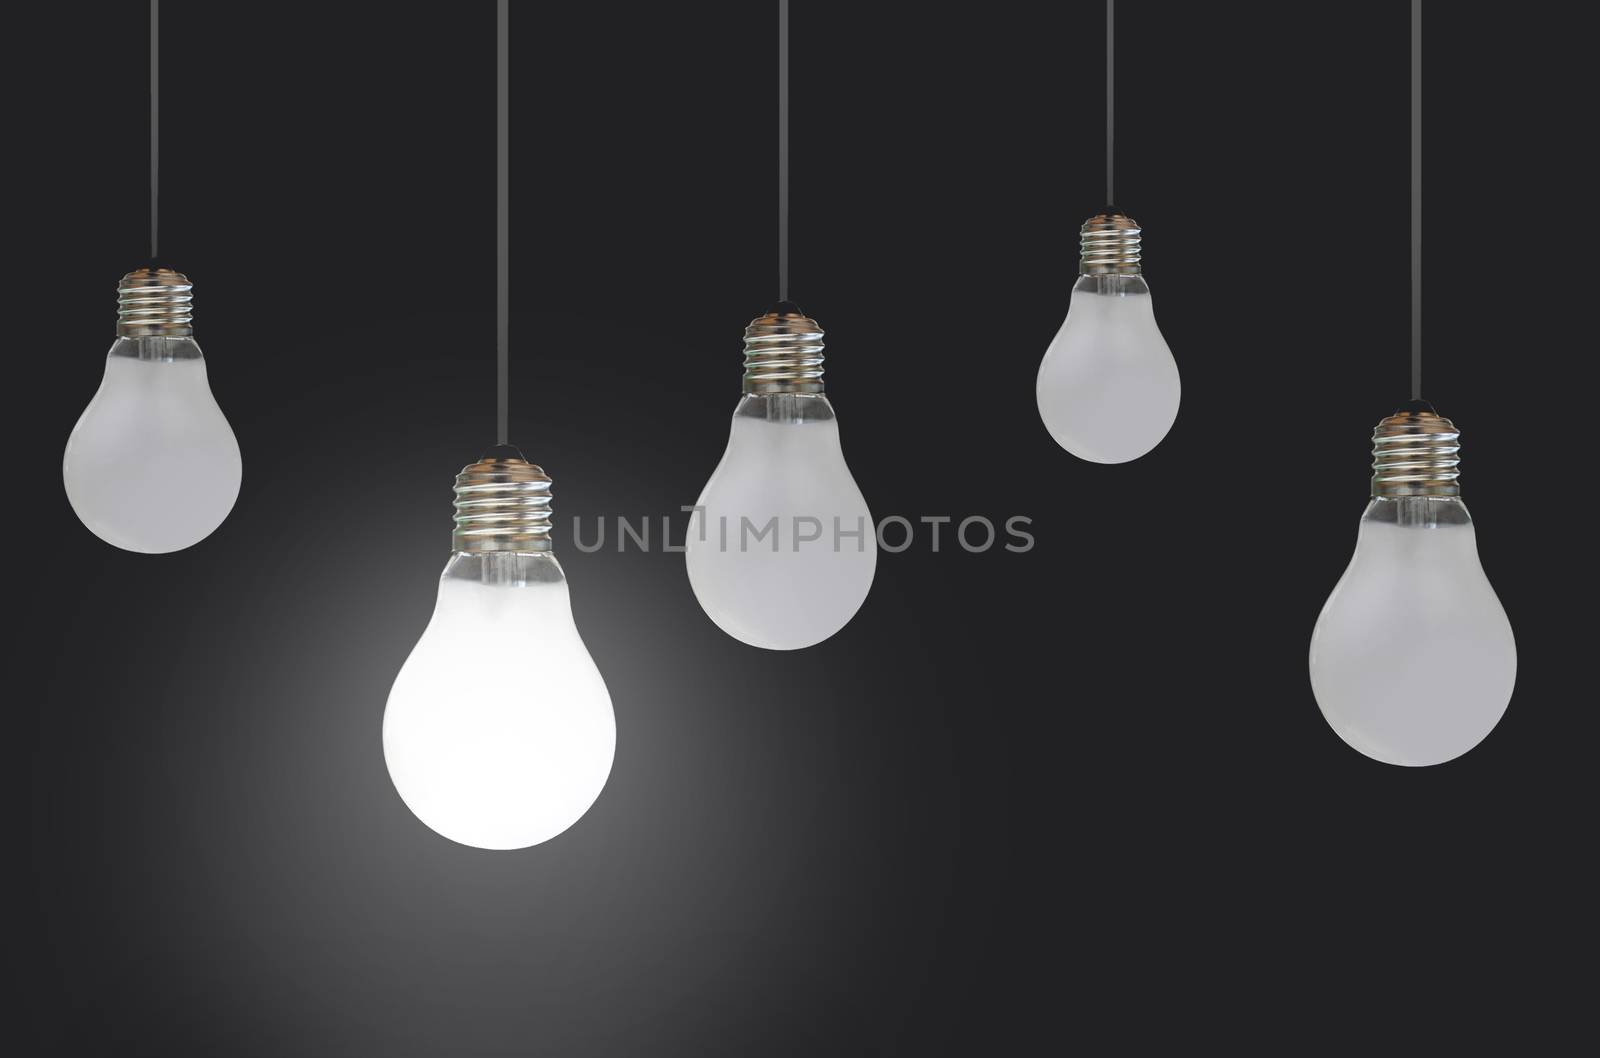 Hanging light bulbs with one lit